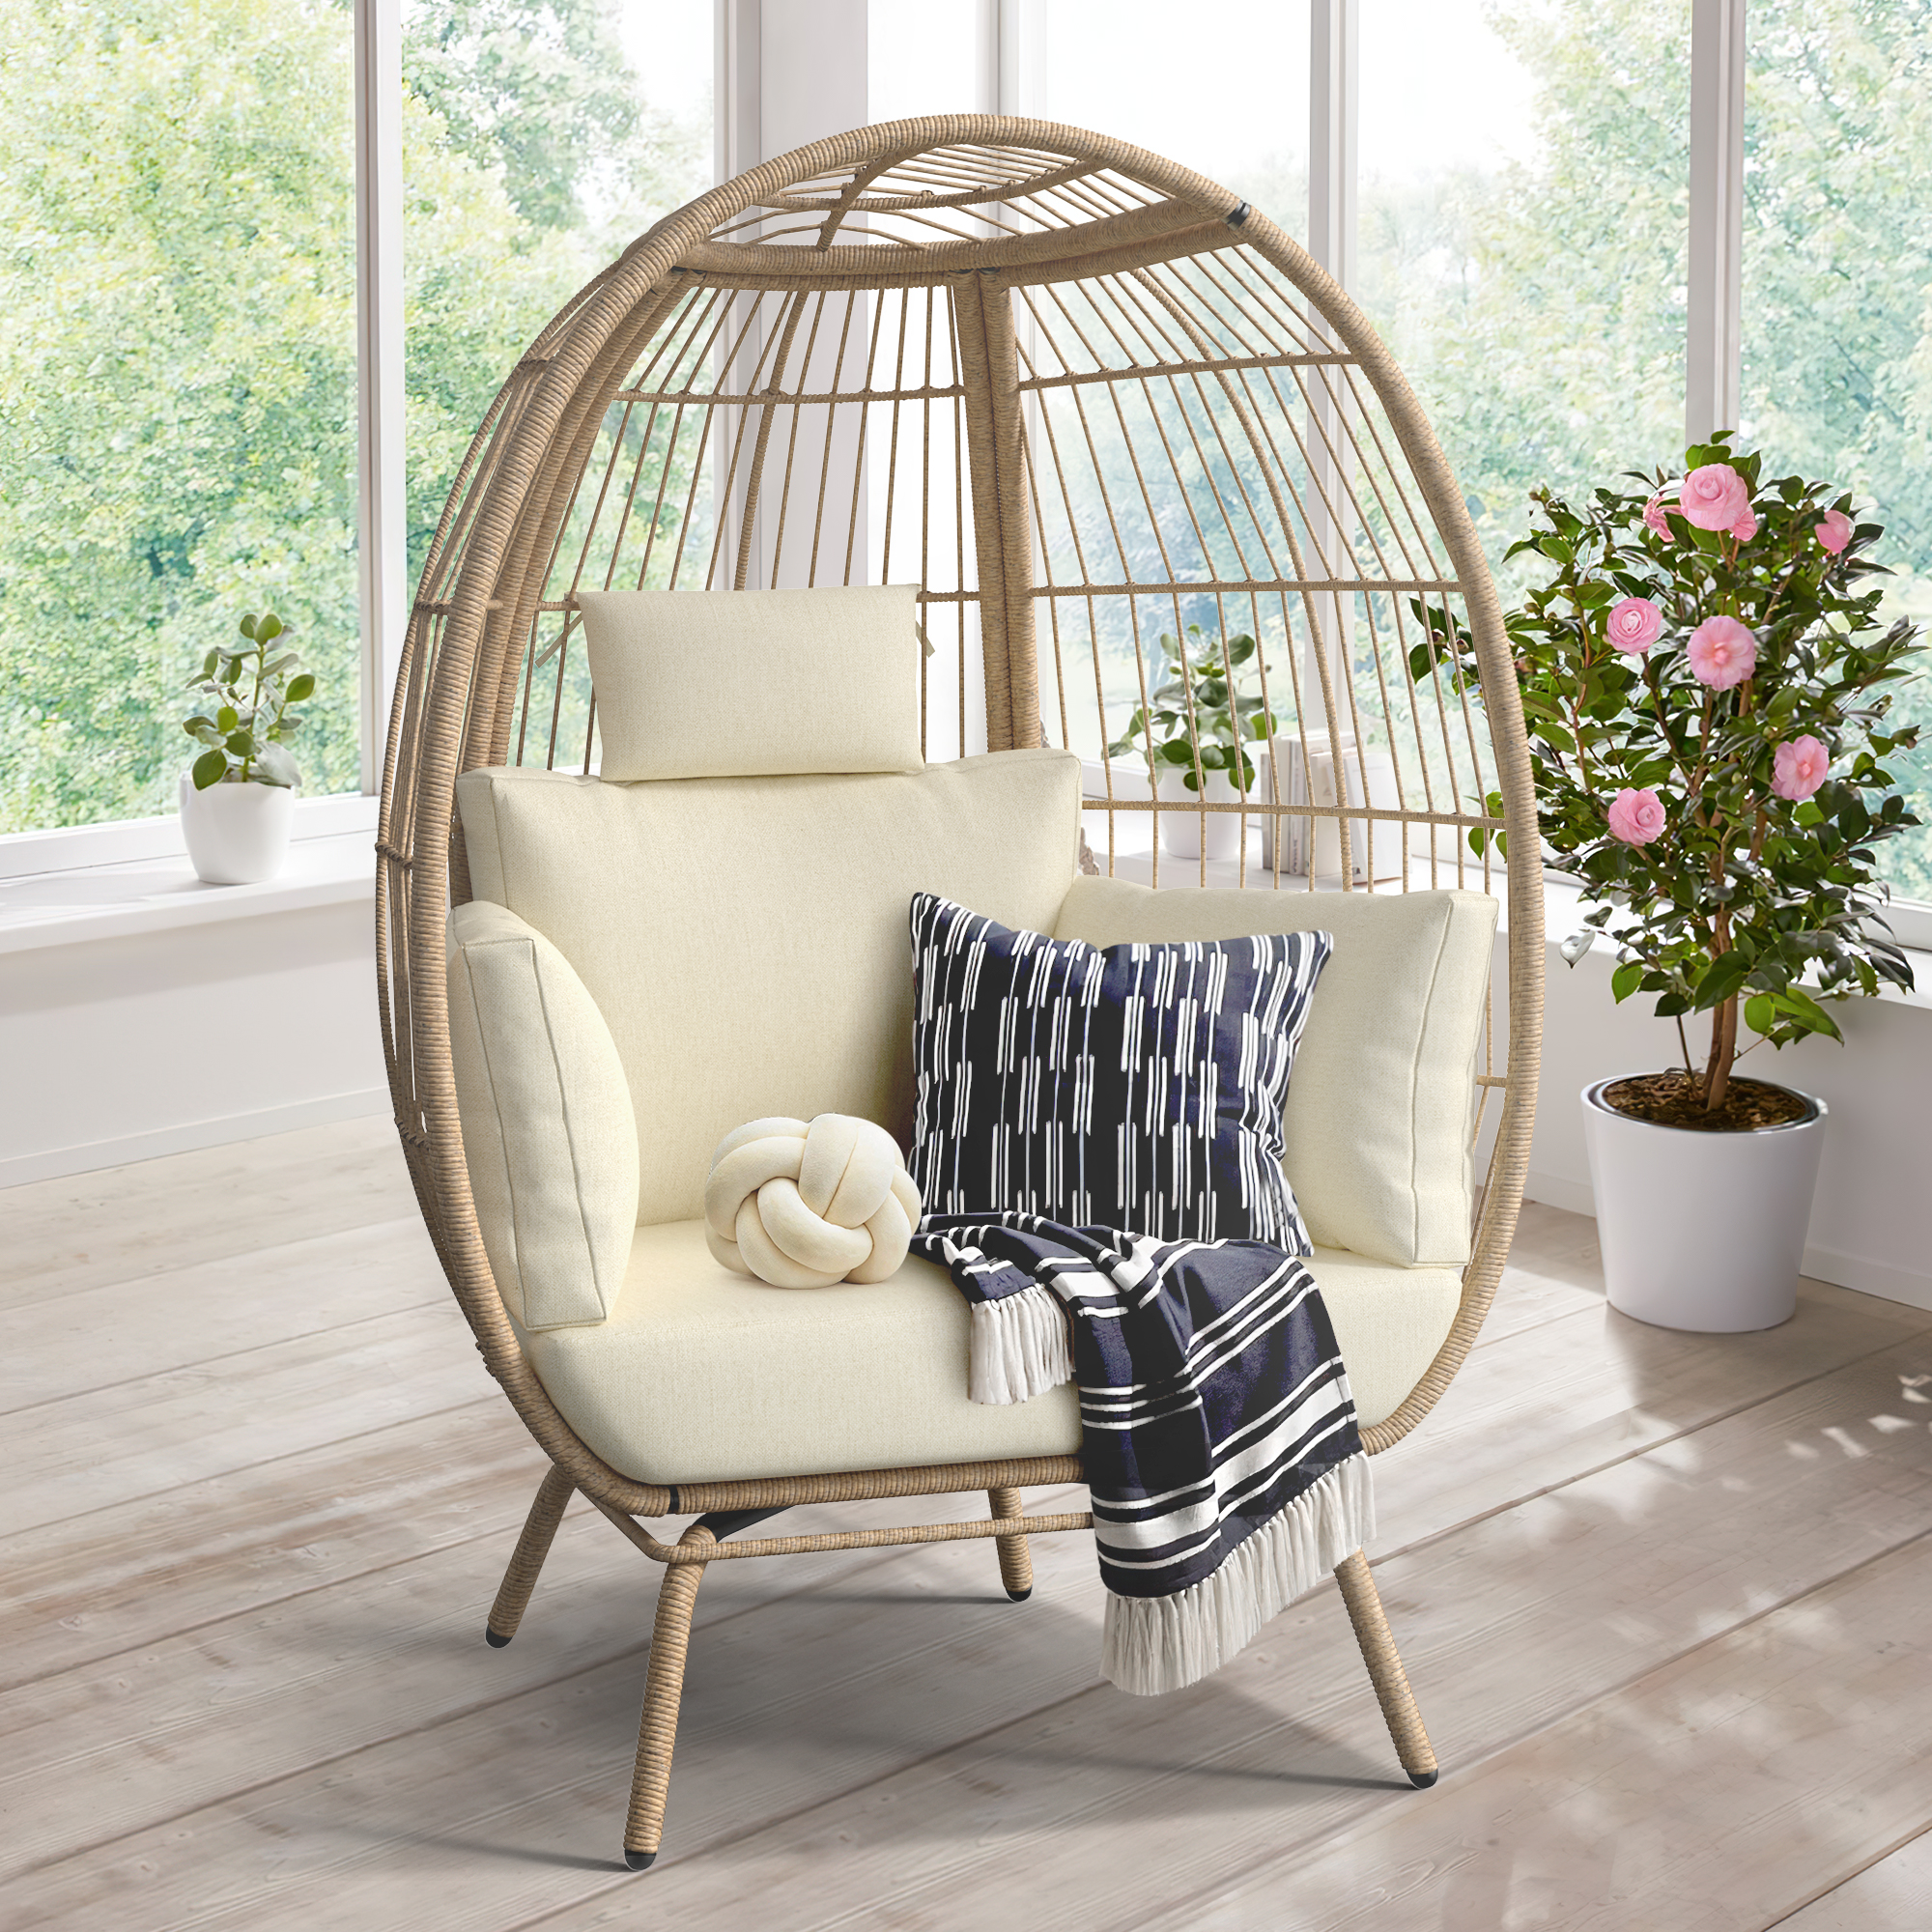 Dextrus Egg Chair, 385lbs Capacity Large Wicker Outdoor Indoor Egg Chairs with Stand Cushion Egg Basket Chair - Beige